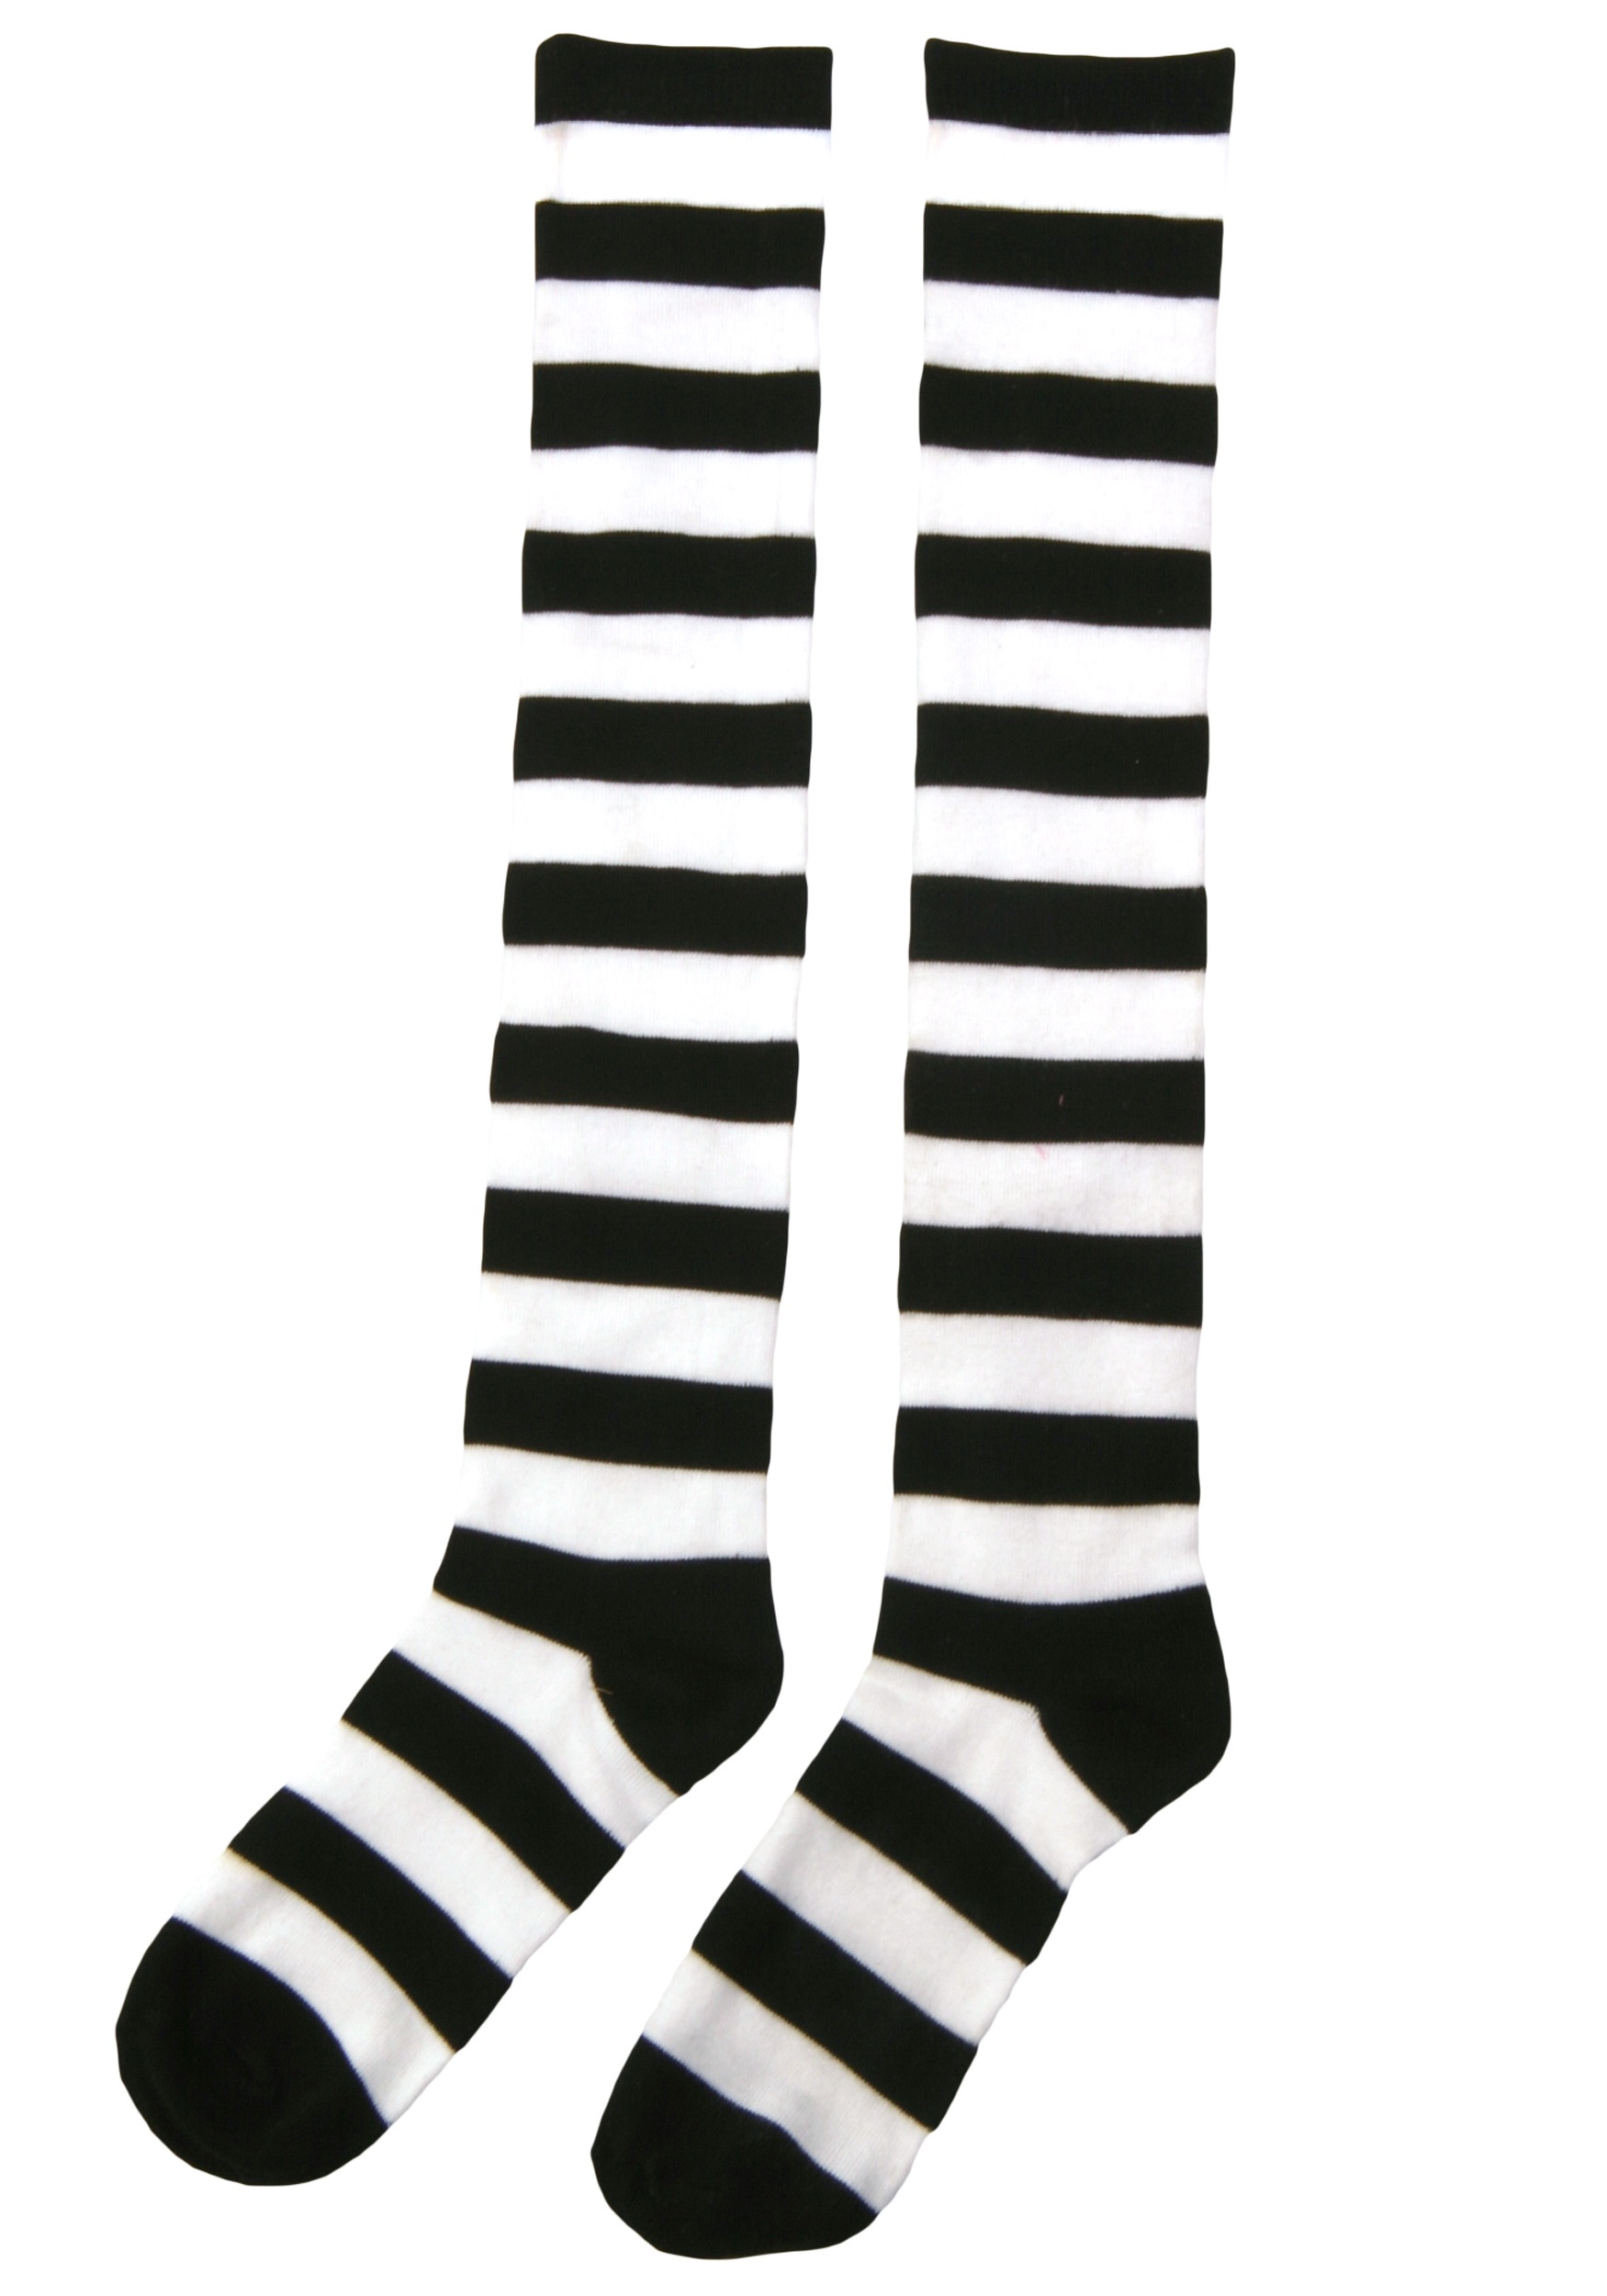 https://images.wizardofozcostumes.com/products/5154/1-1/striped-witch-stockings.jpg